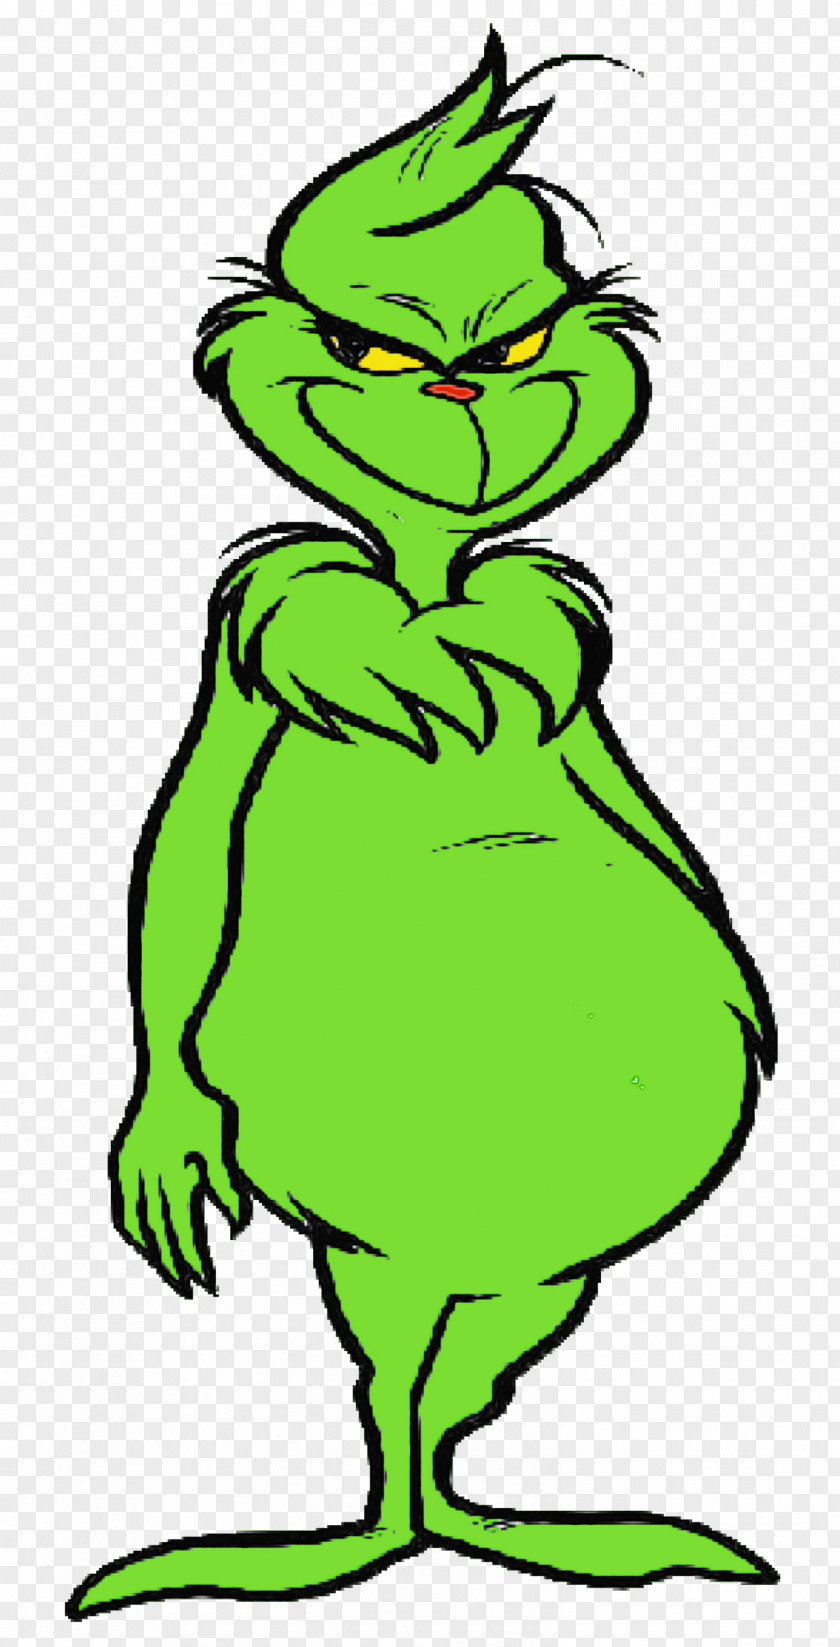 How The Grinch Stole Christmas! Clip Art Cindy Lou Who PNG